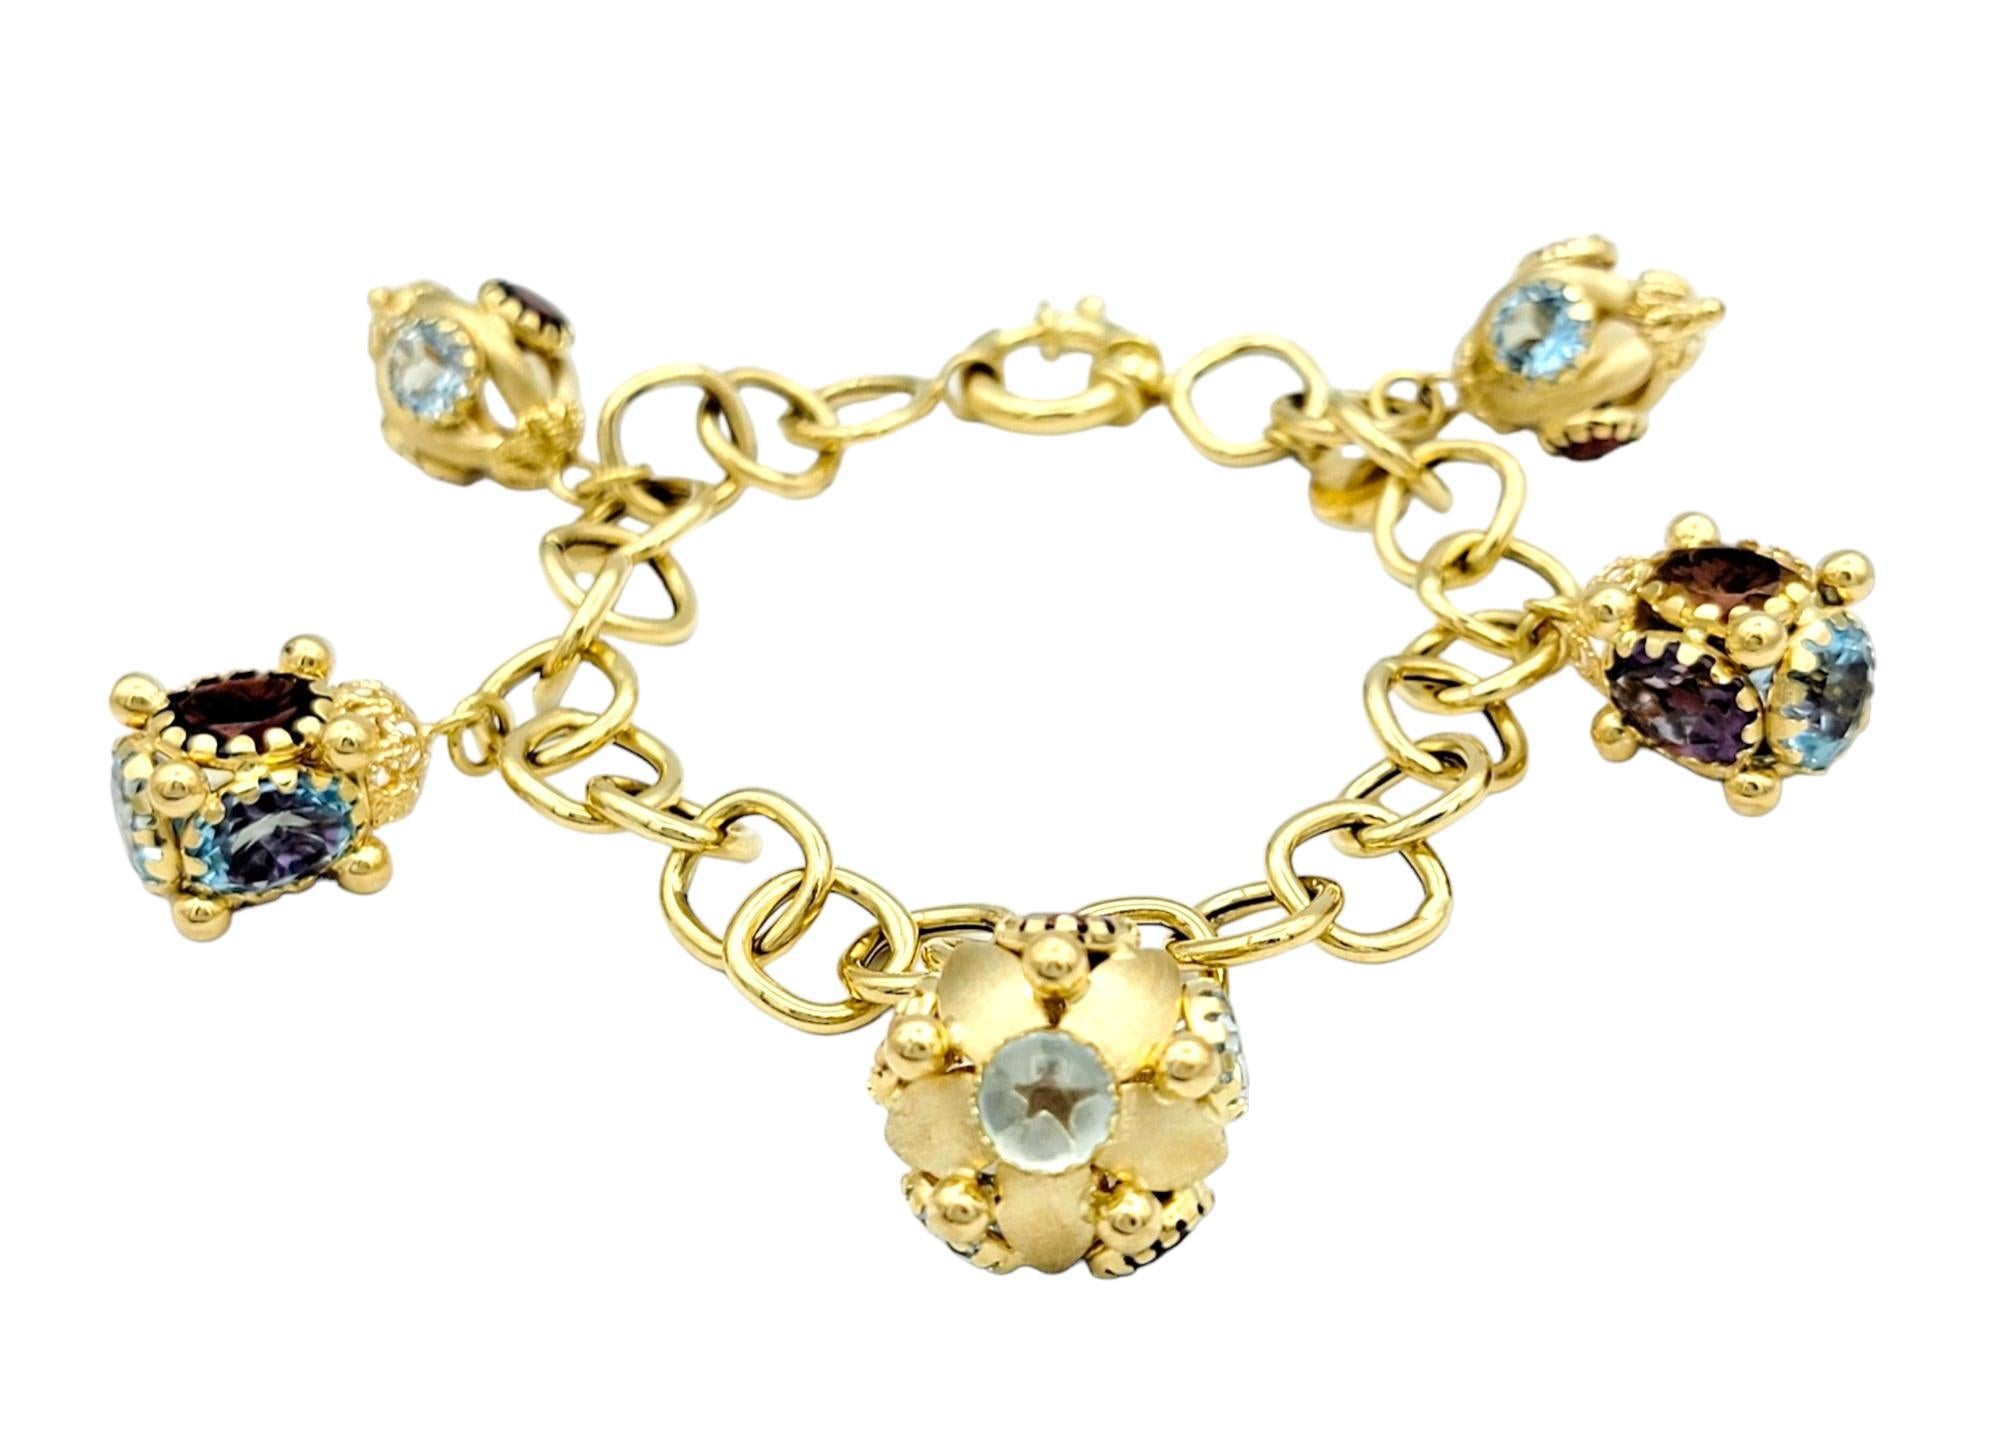 This enchanting charm bracelet, crafted in radiant 18 karat yellow gold, is a celebration of unique elegance. The chunky chain imparts a bold and contemporary feel, providing a sturdy foundation for the eclectic assortment of charms. The bracelet